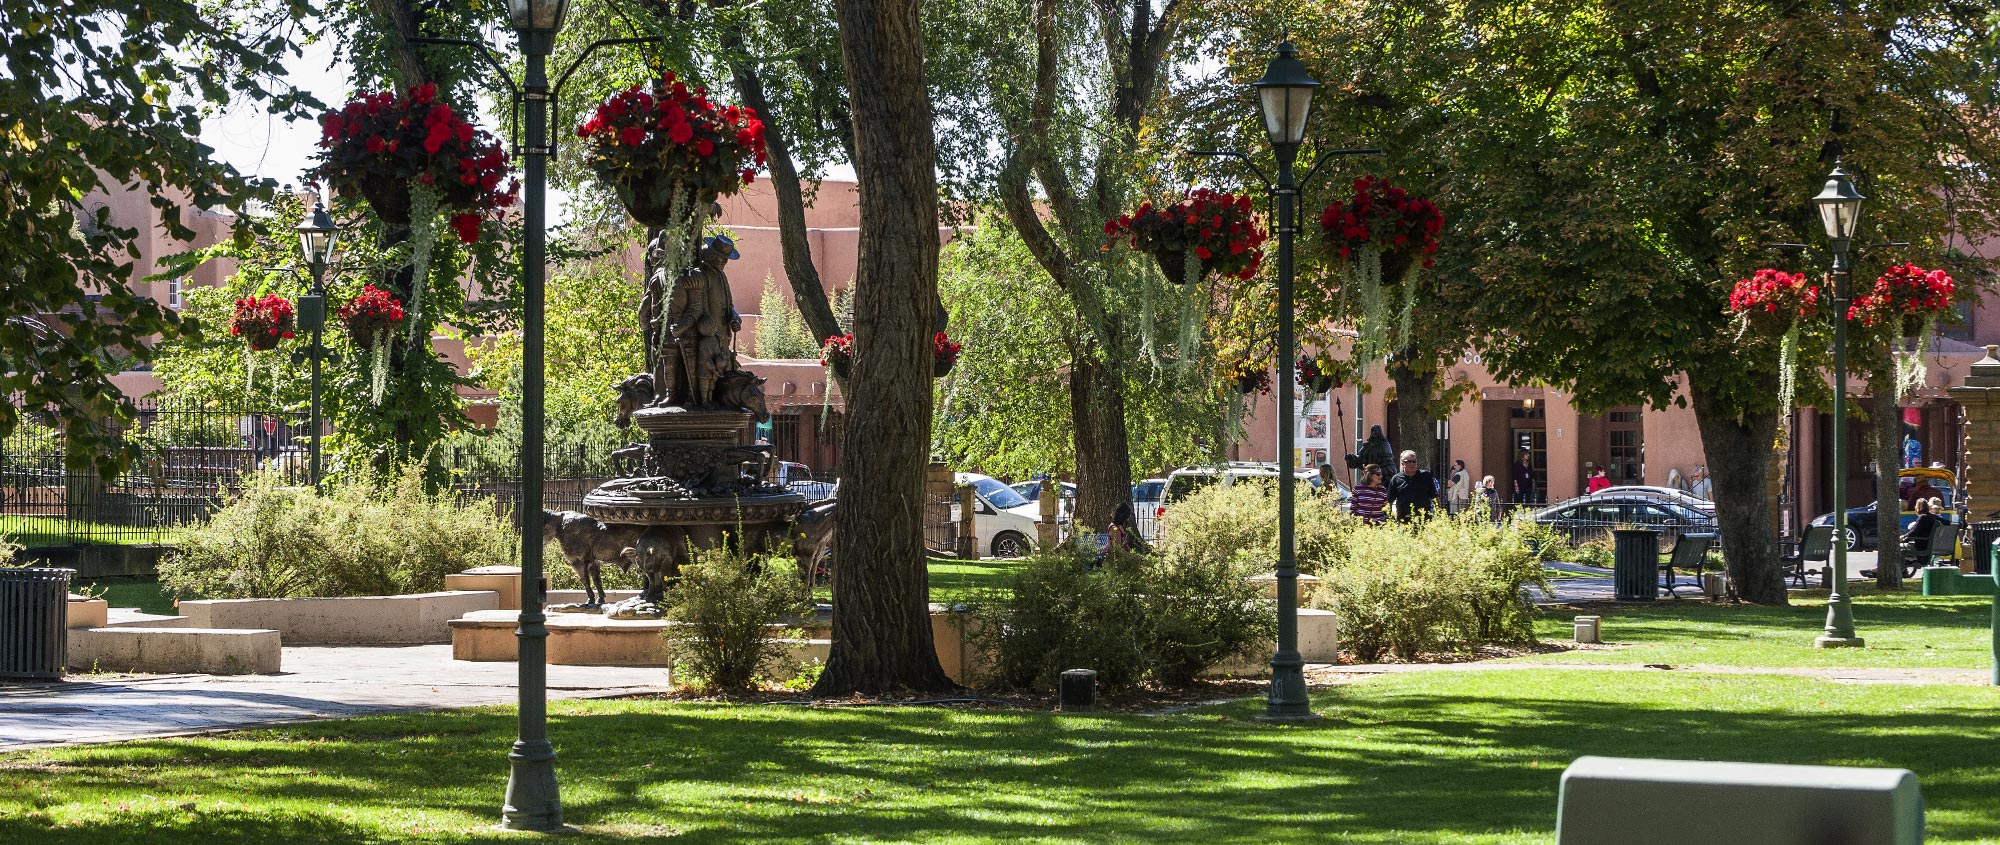 Cathedral Park in downtown Santa Fe. Shade trees, green grass, and statue.